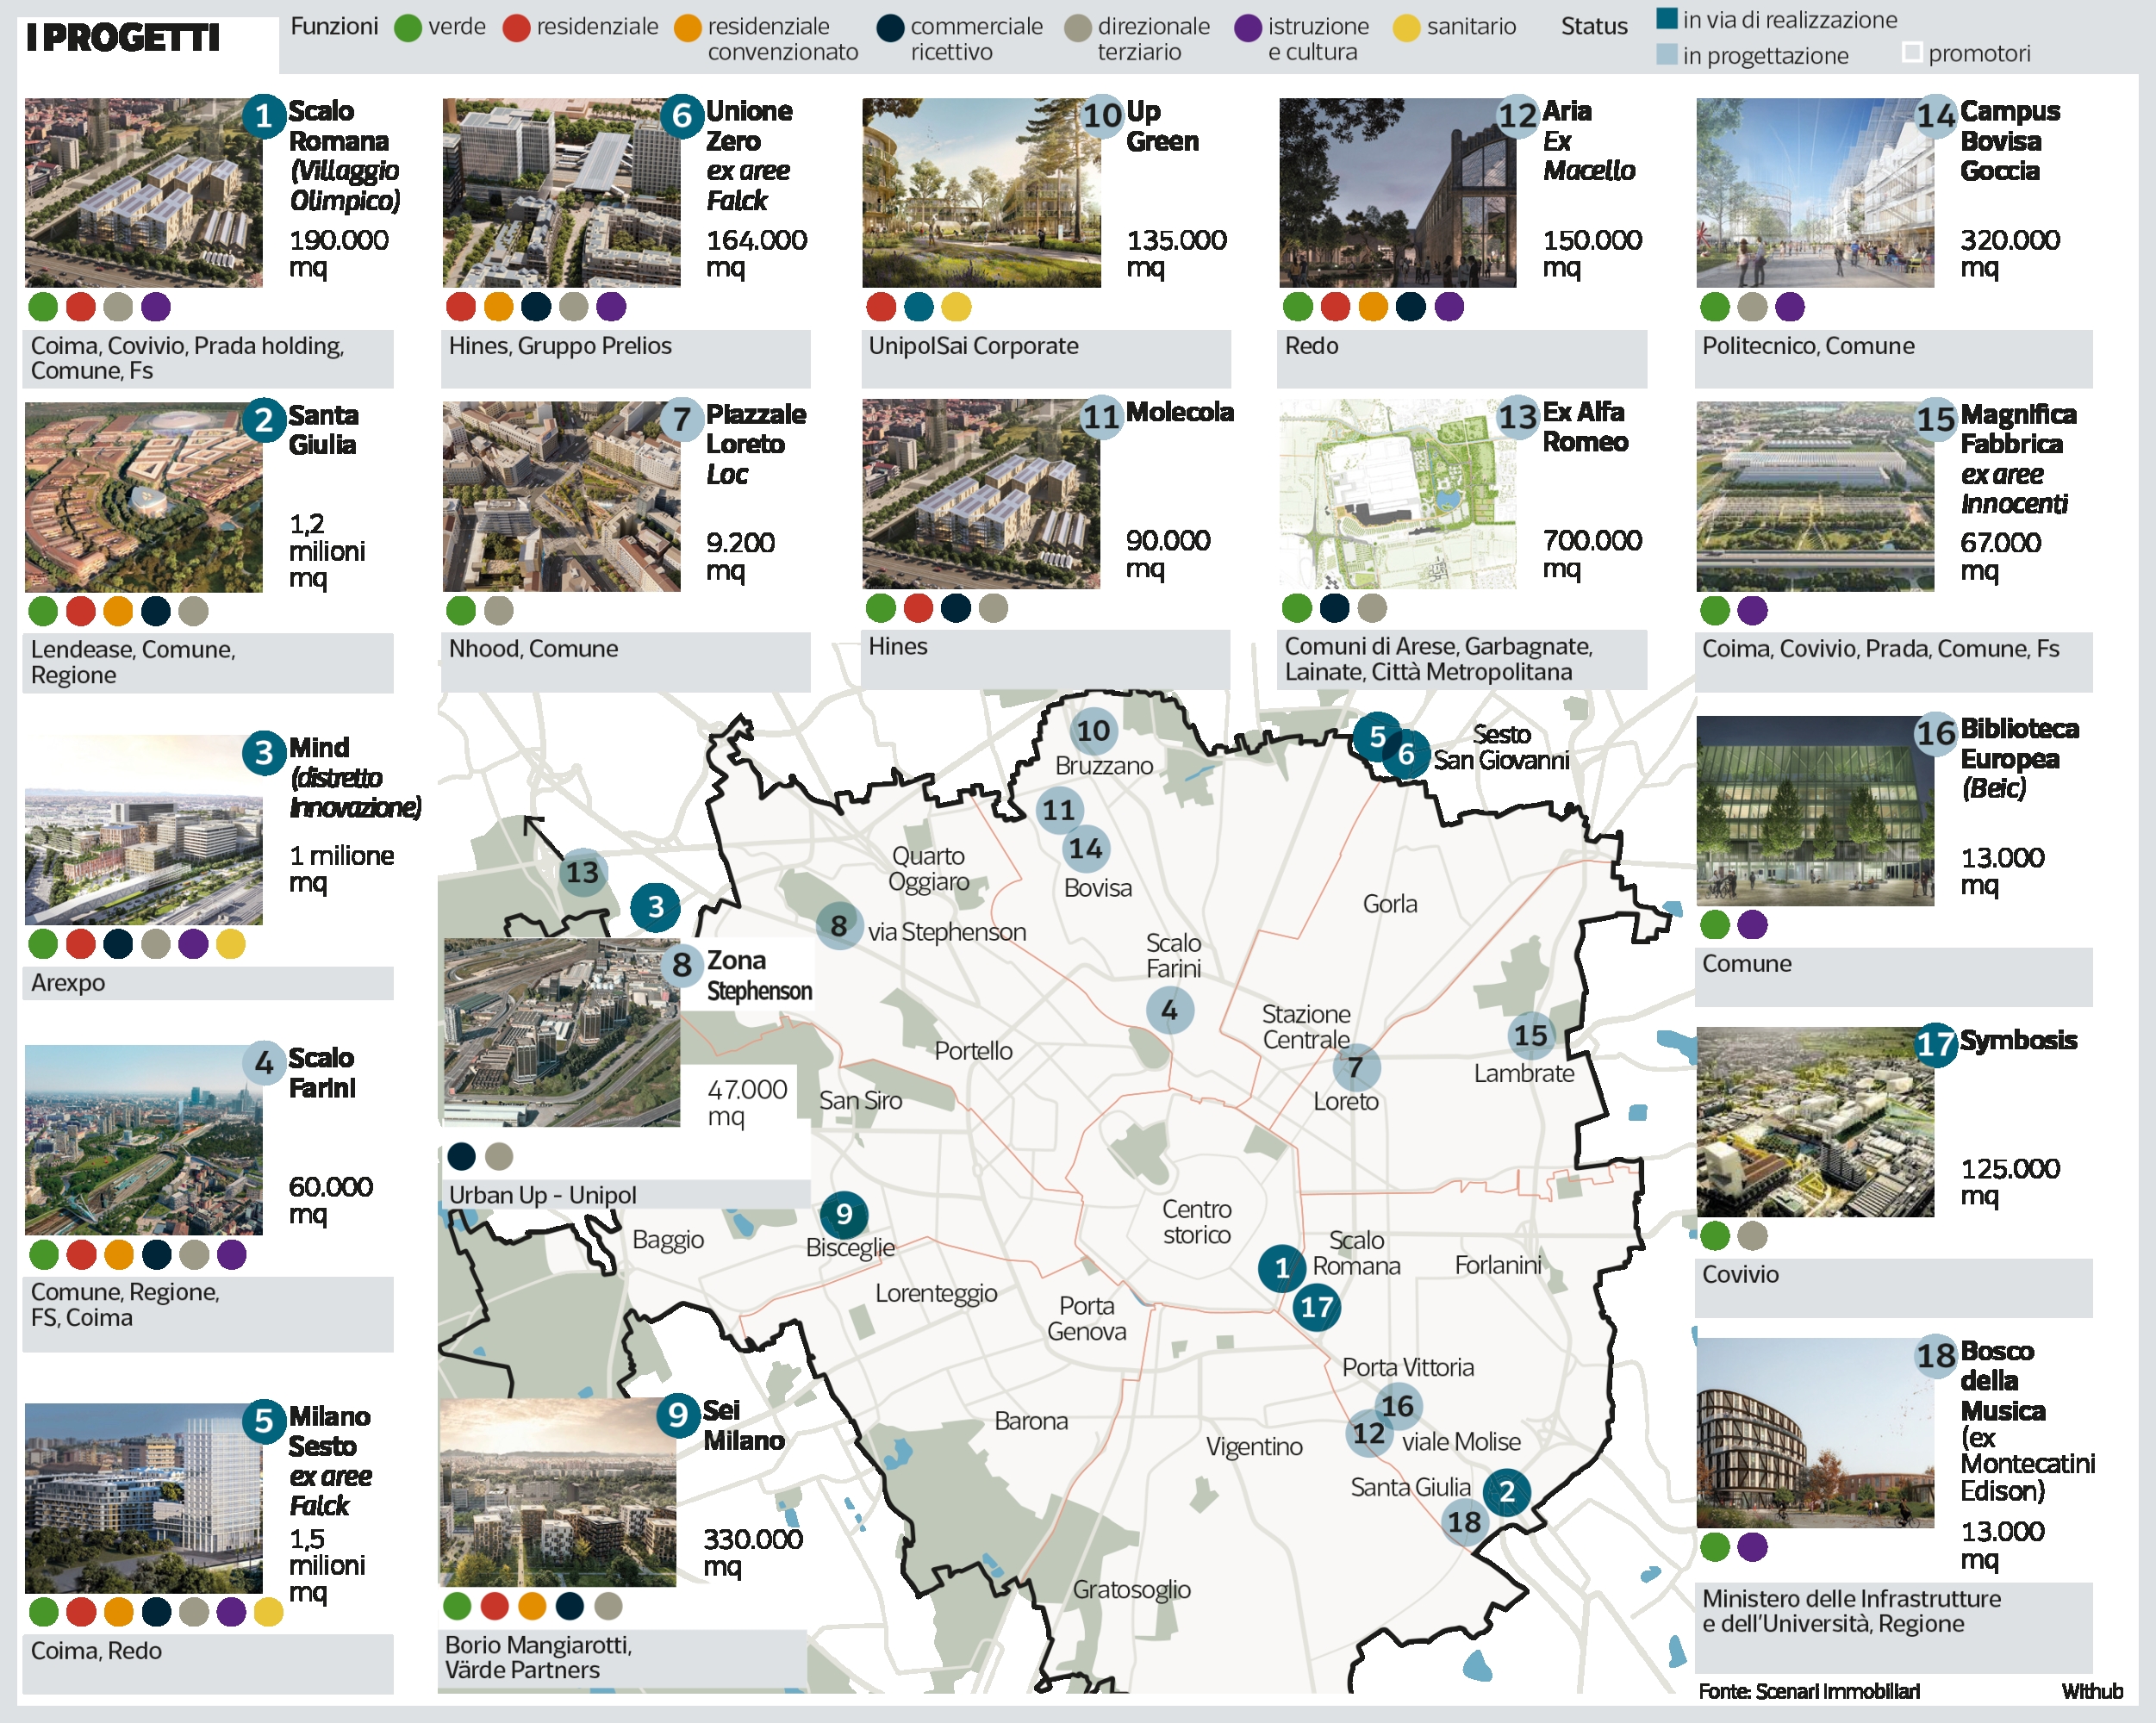 Corriere della sera: Milan regenerated by saving the soil: the map of large urban projects in abandoned areas